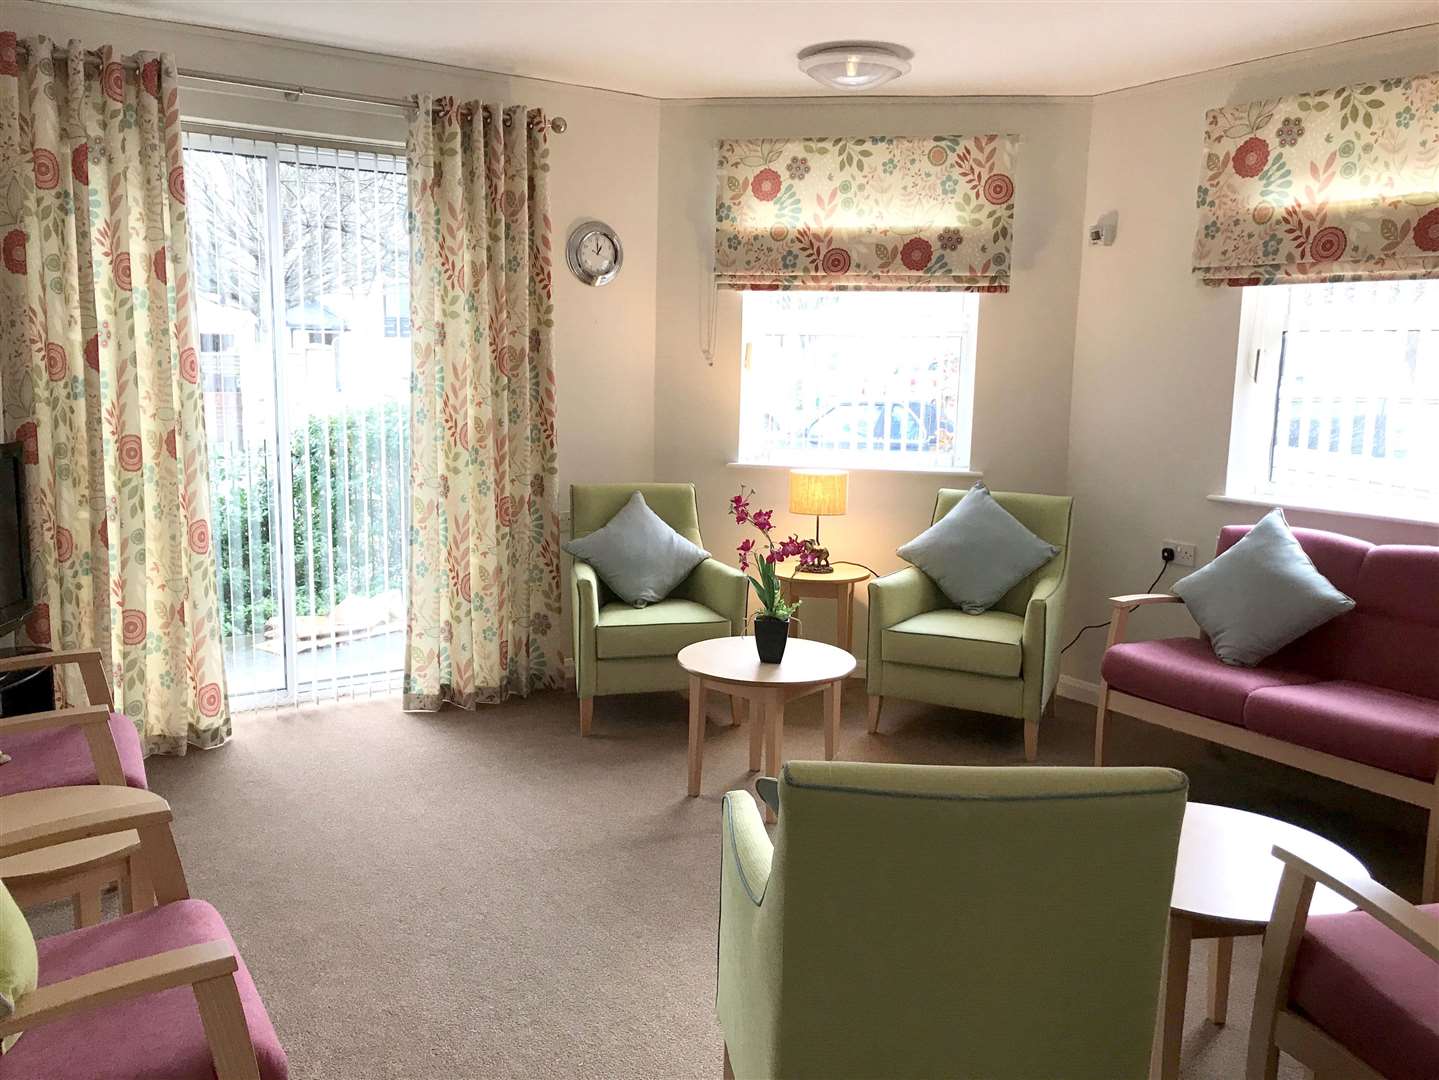 Retirement homes have been refurbished and upgraded with heating systems and complete redecoration of their communal areas